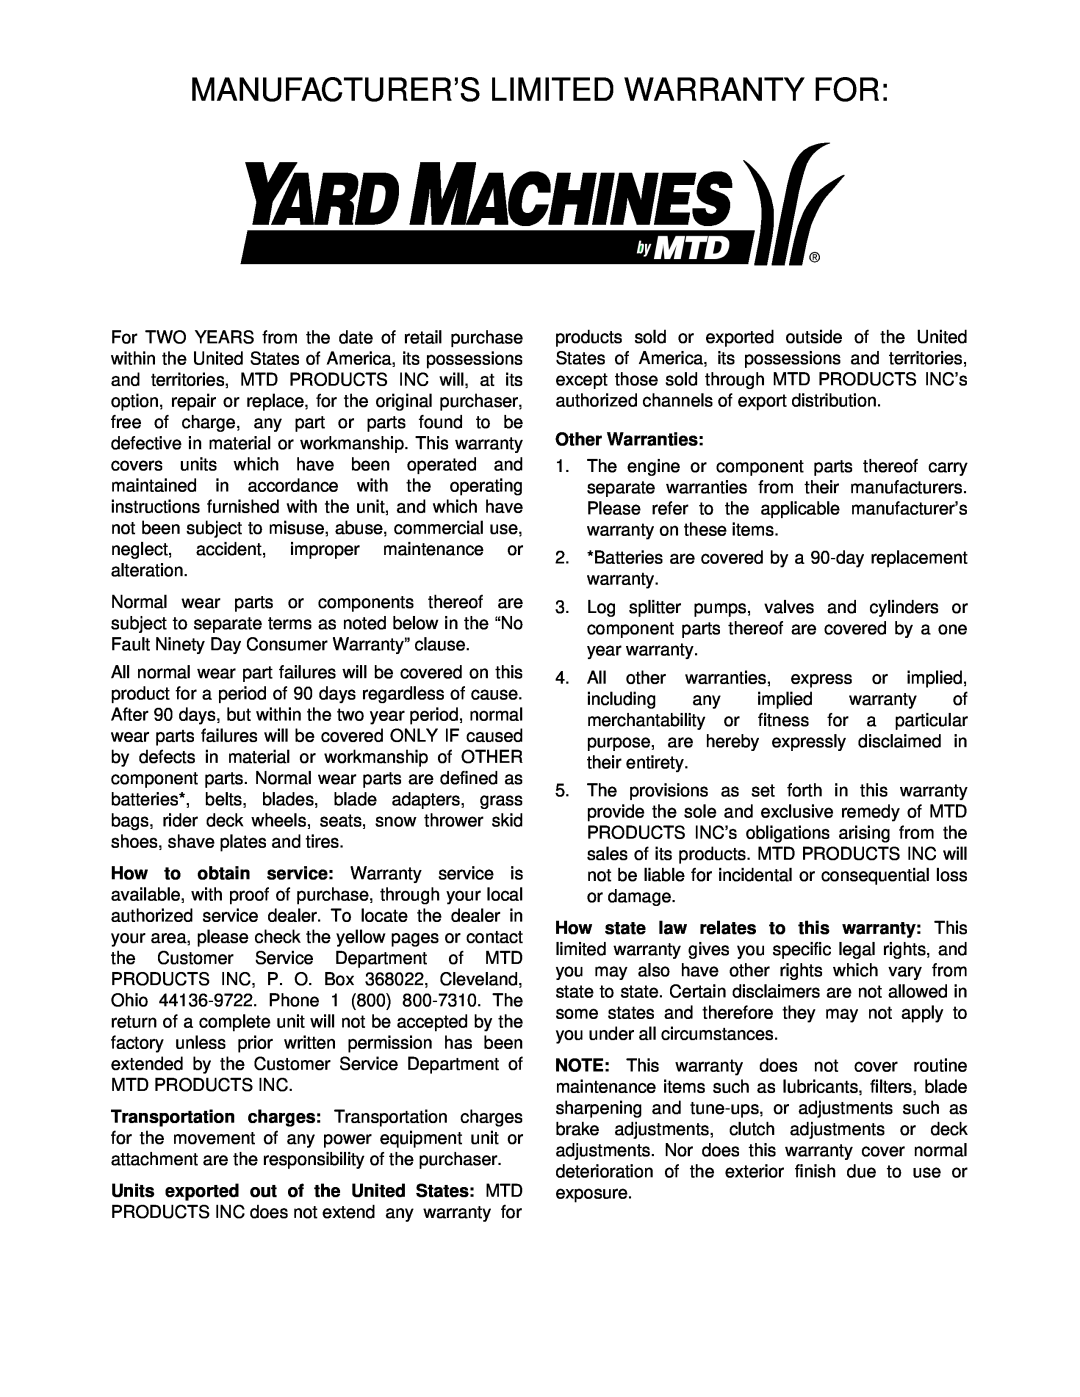 Yard Machines 570 manual Manufacturer’S Limited Warranty For, Other Warranties 